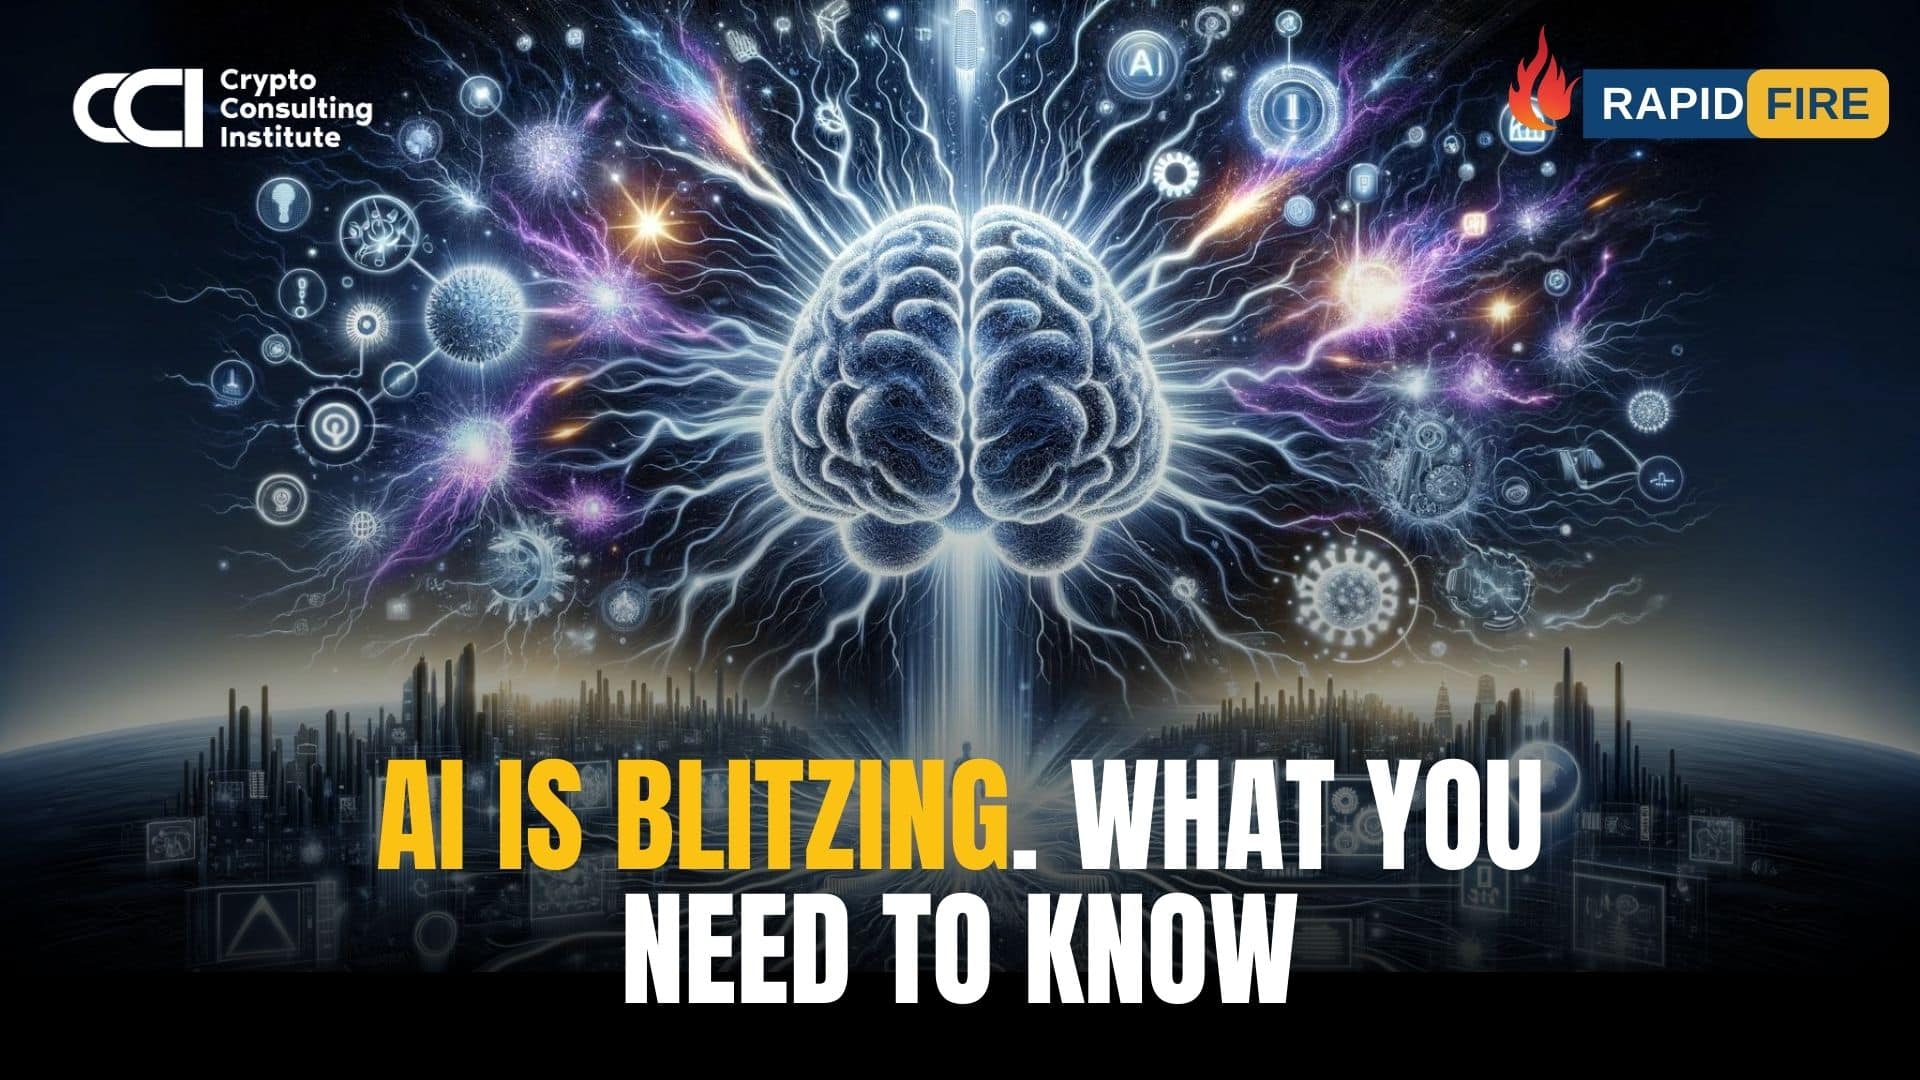 AI is blitzing. What you NEED to know